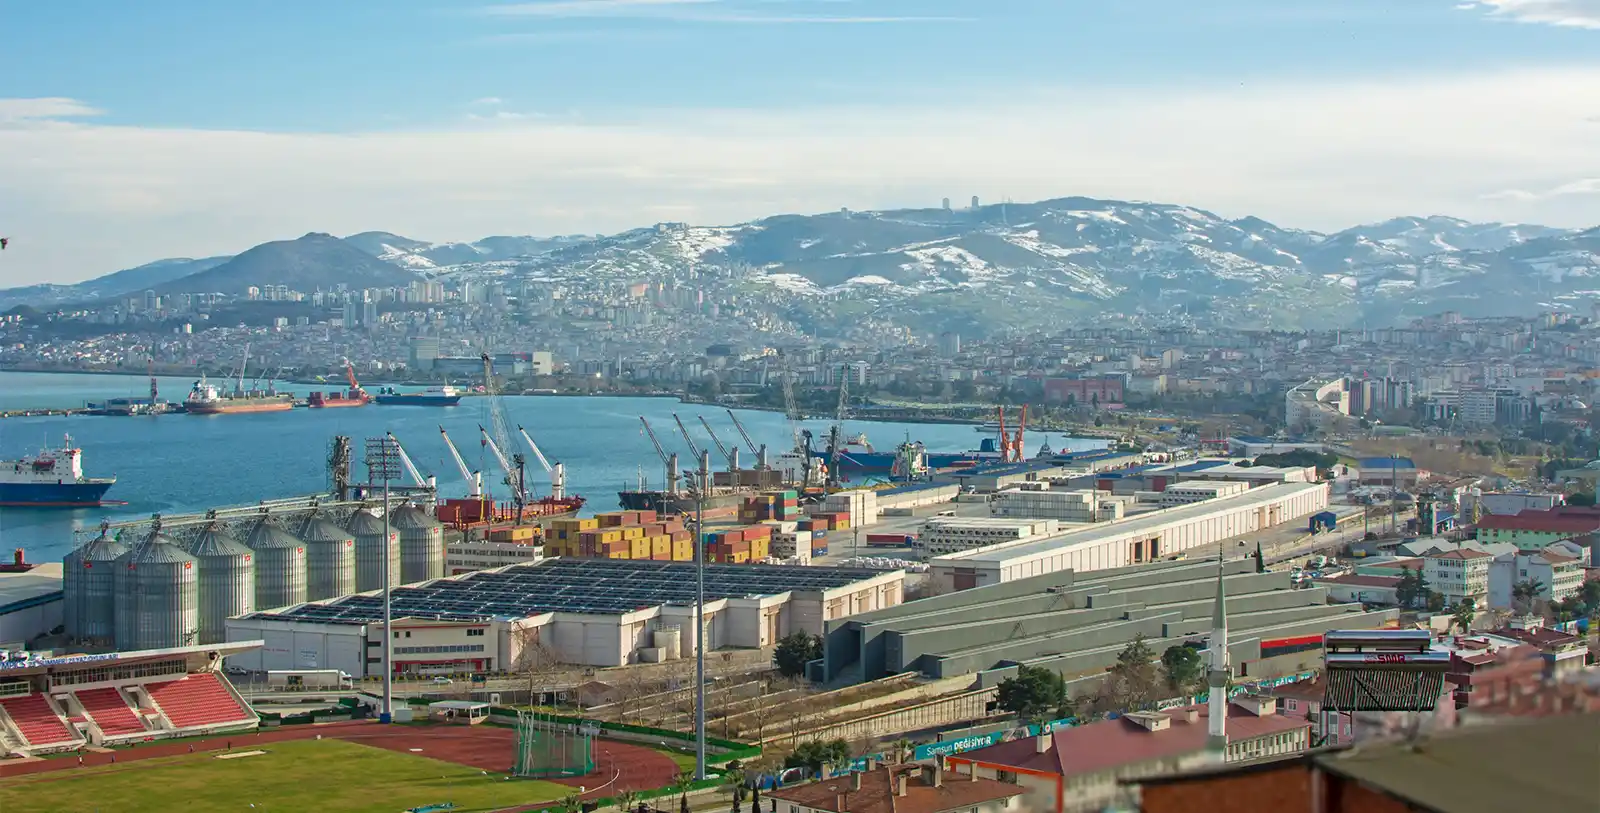 A port in Turkey: Turkey has one of the most advantegous locations in the world.